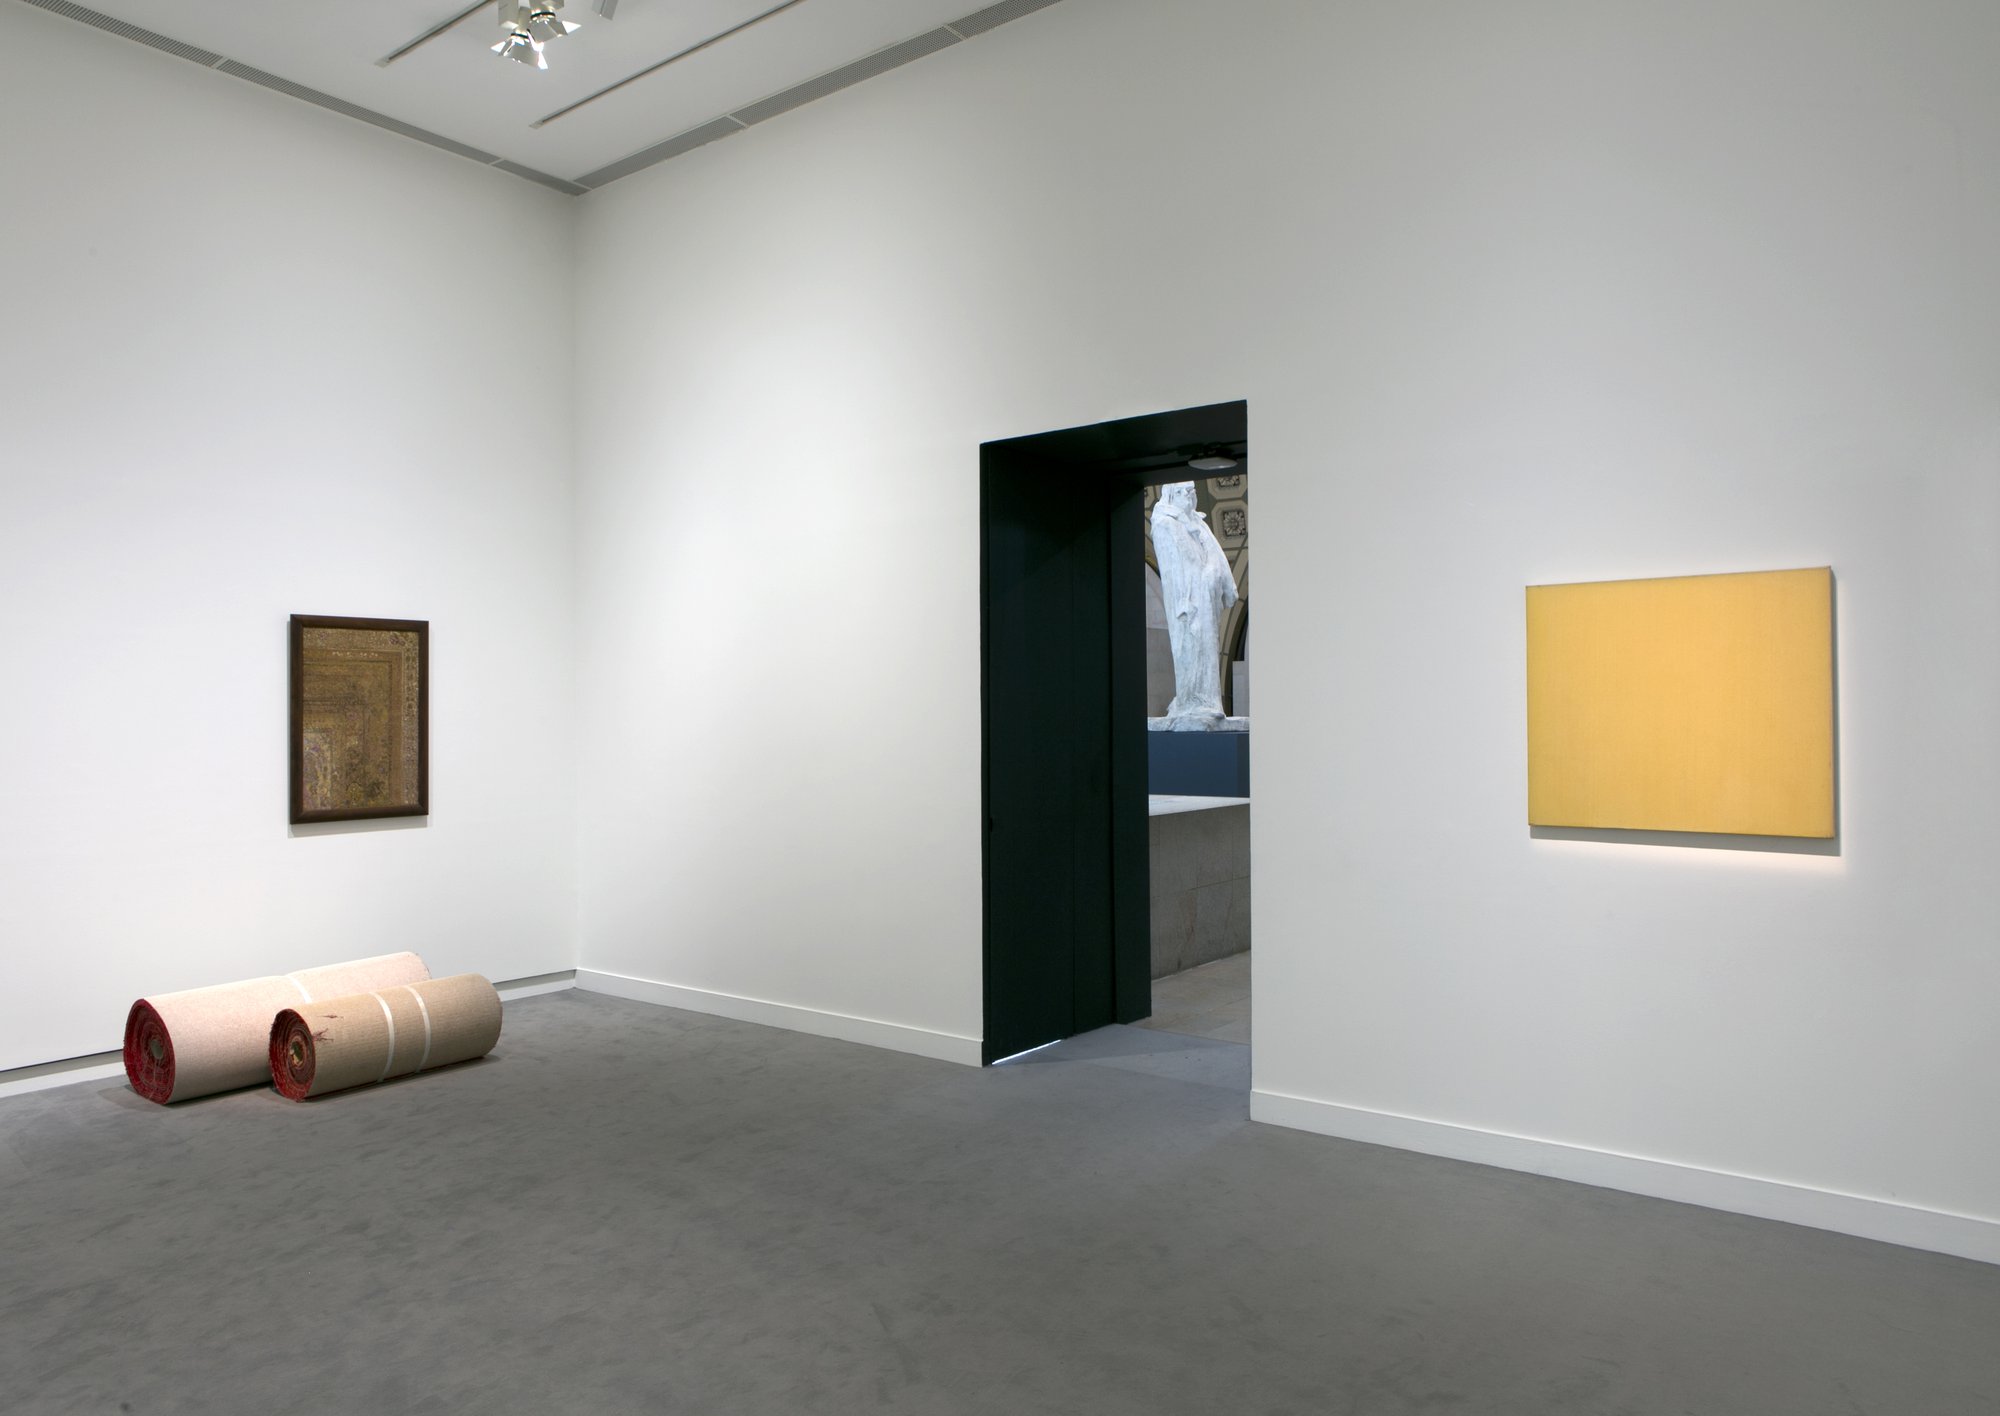 Christodoulos Panayiotou, Installation view, LUX S. 1003 334, Musée d’ Orsay, Paris, 2019